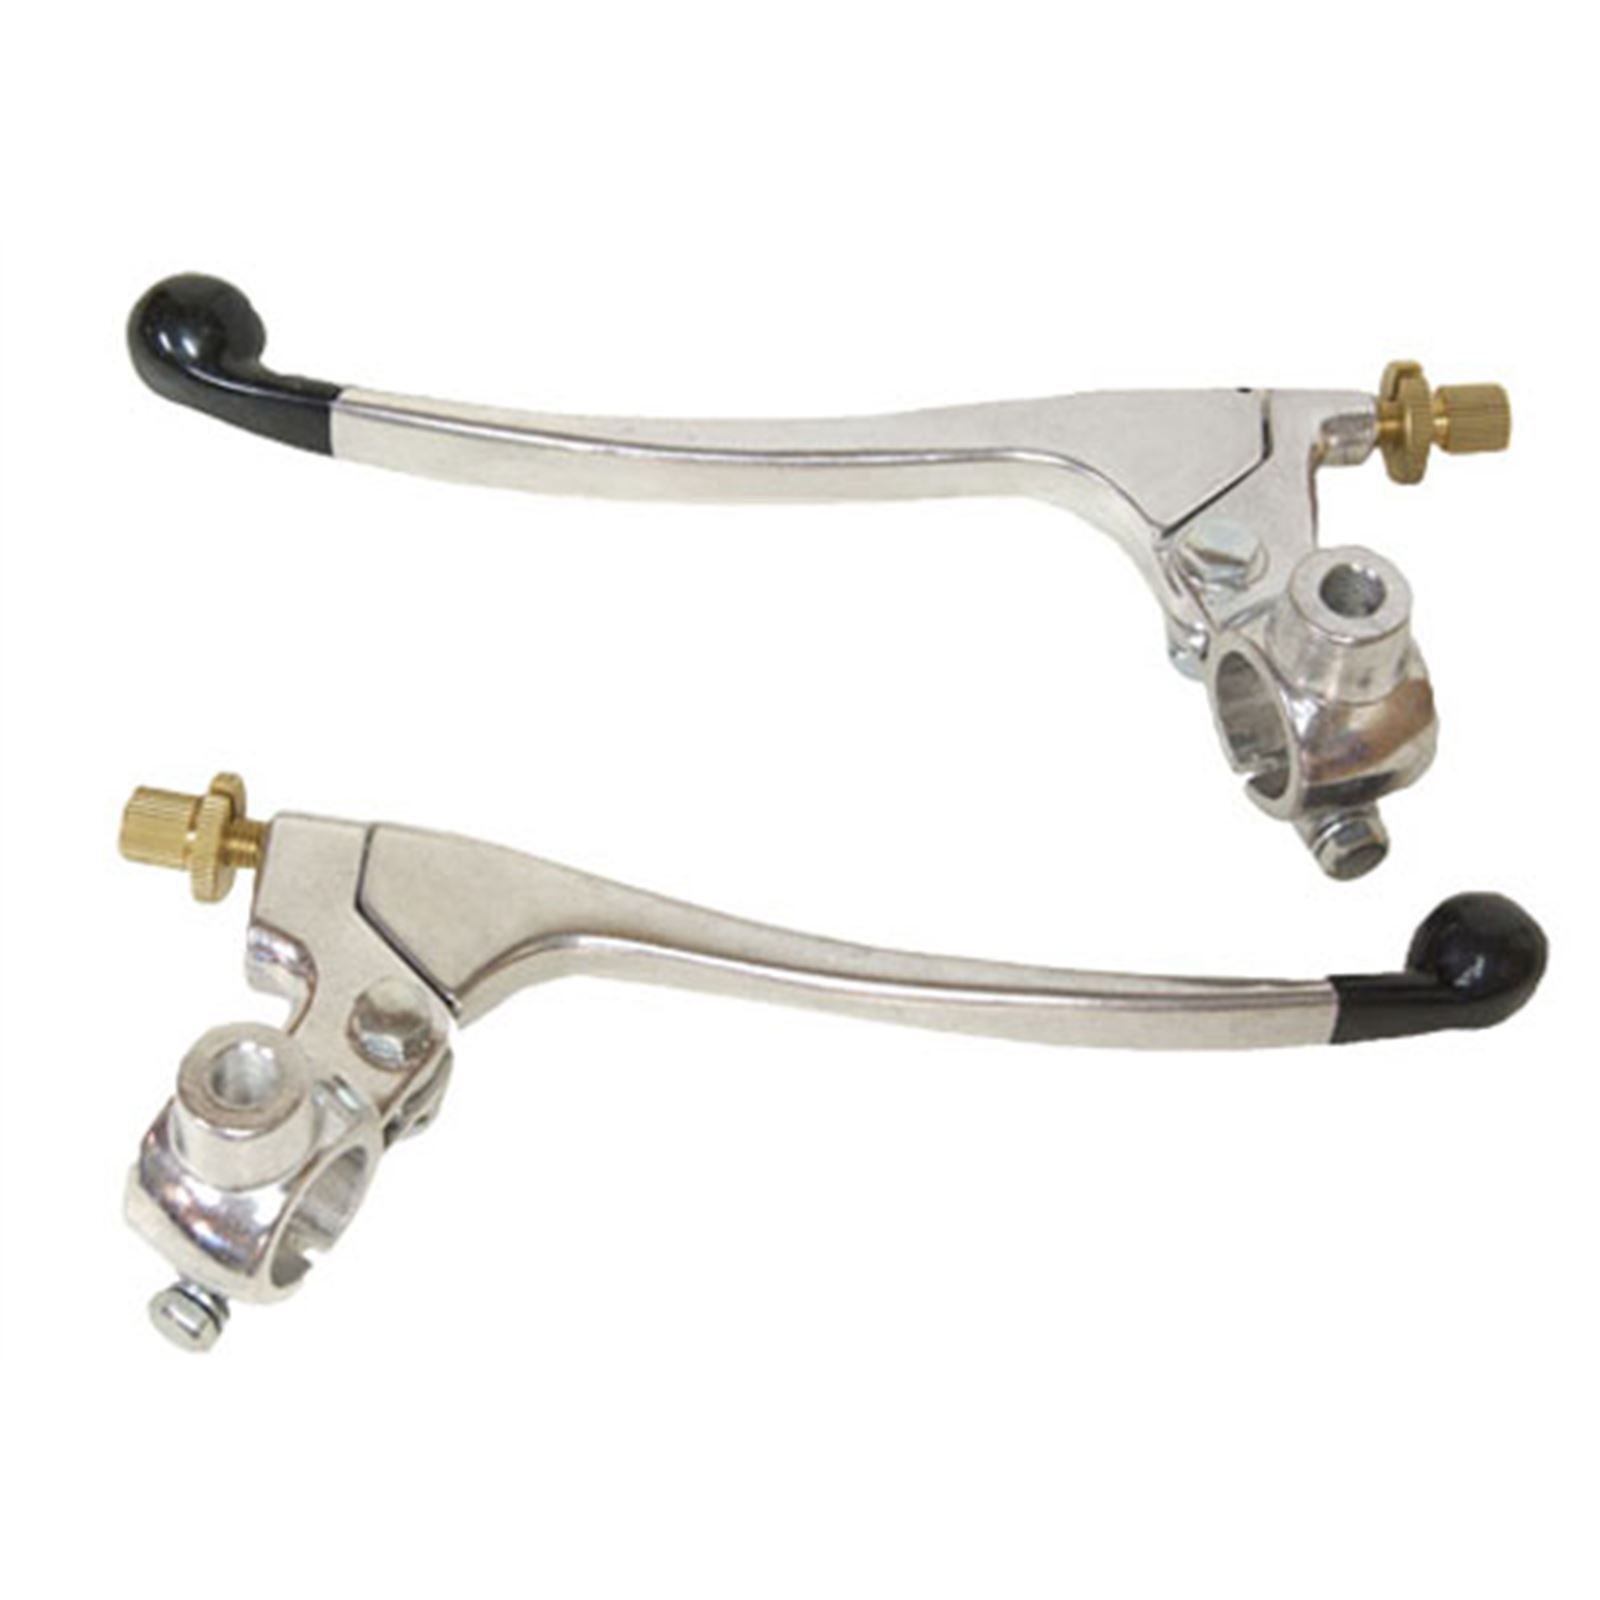 2FastMoto Brake/Clutch Lever Assembly Set - Alloy 32-69800